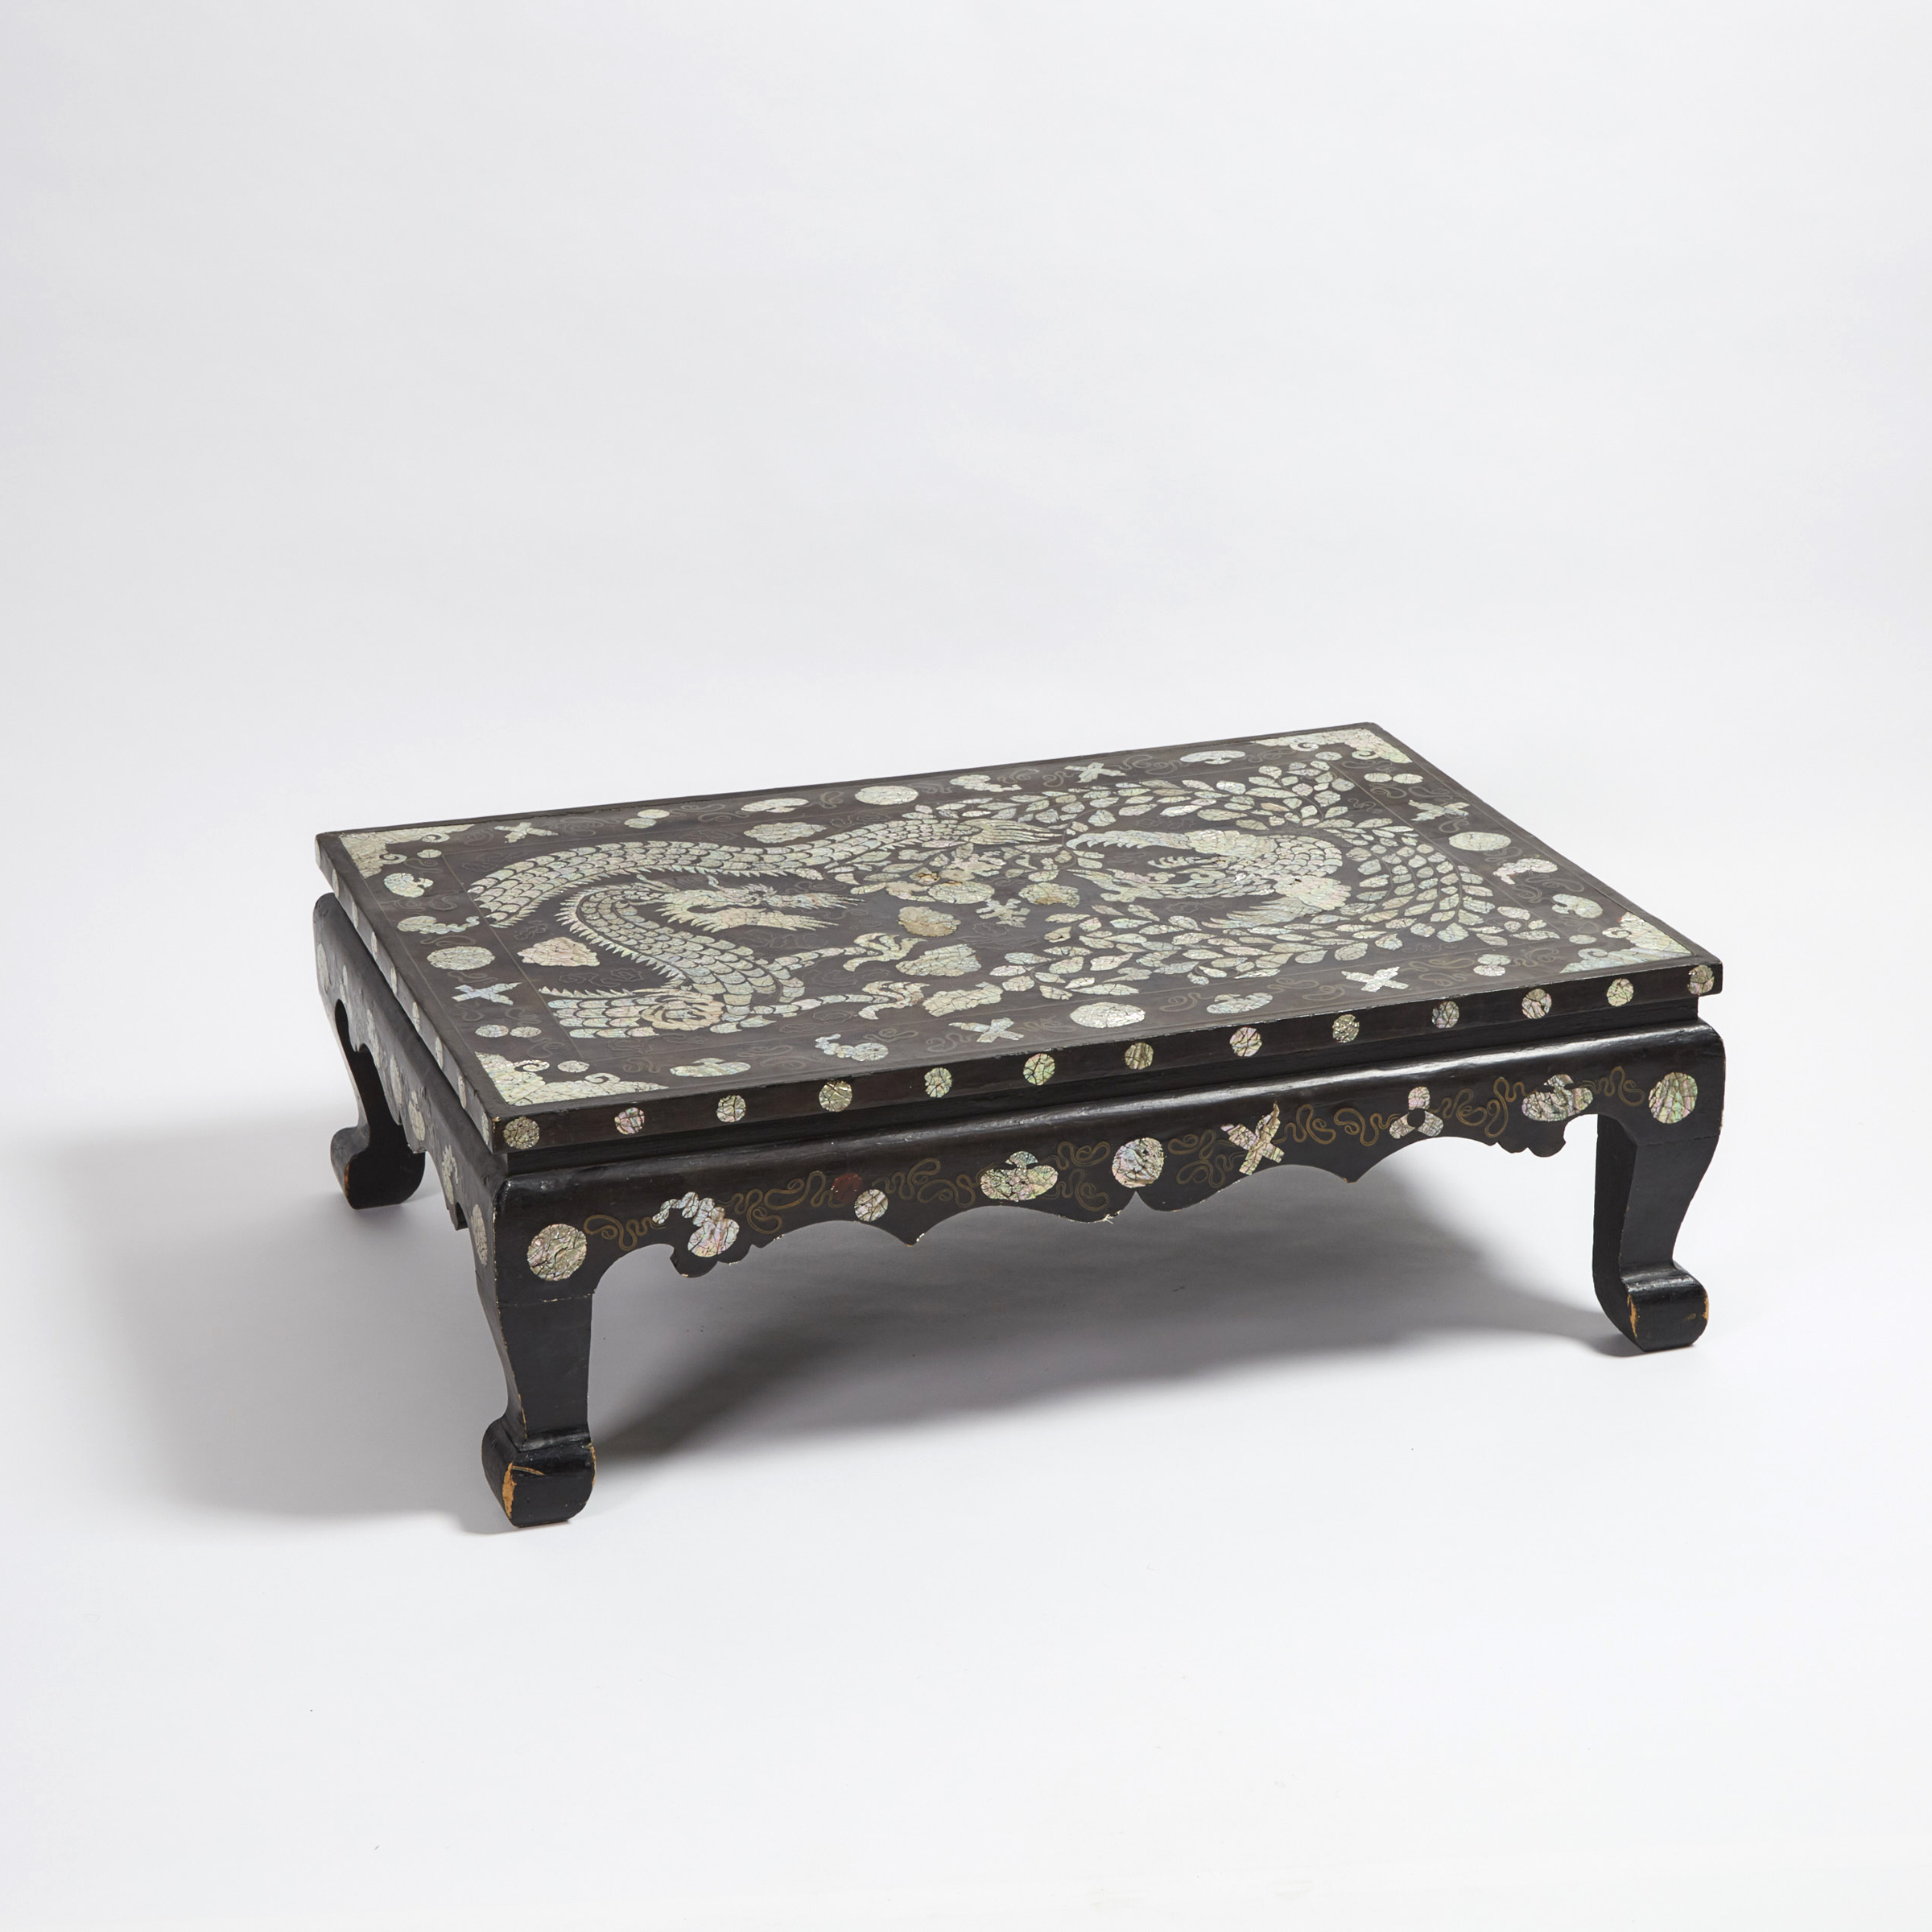 A Korean Mother-of-Pearl and Wire Inlaid Lacquer Table